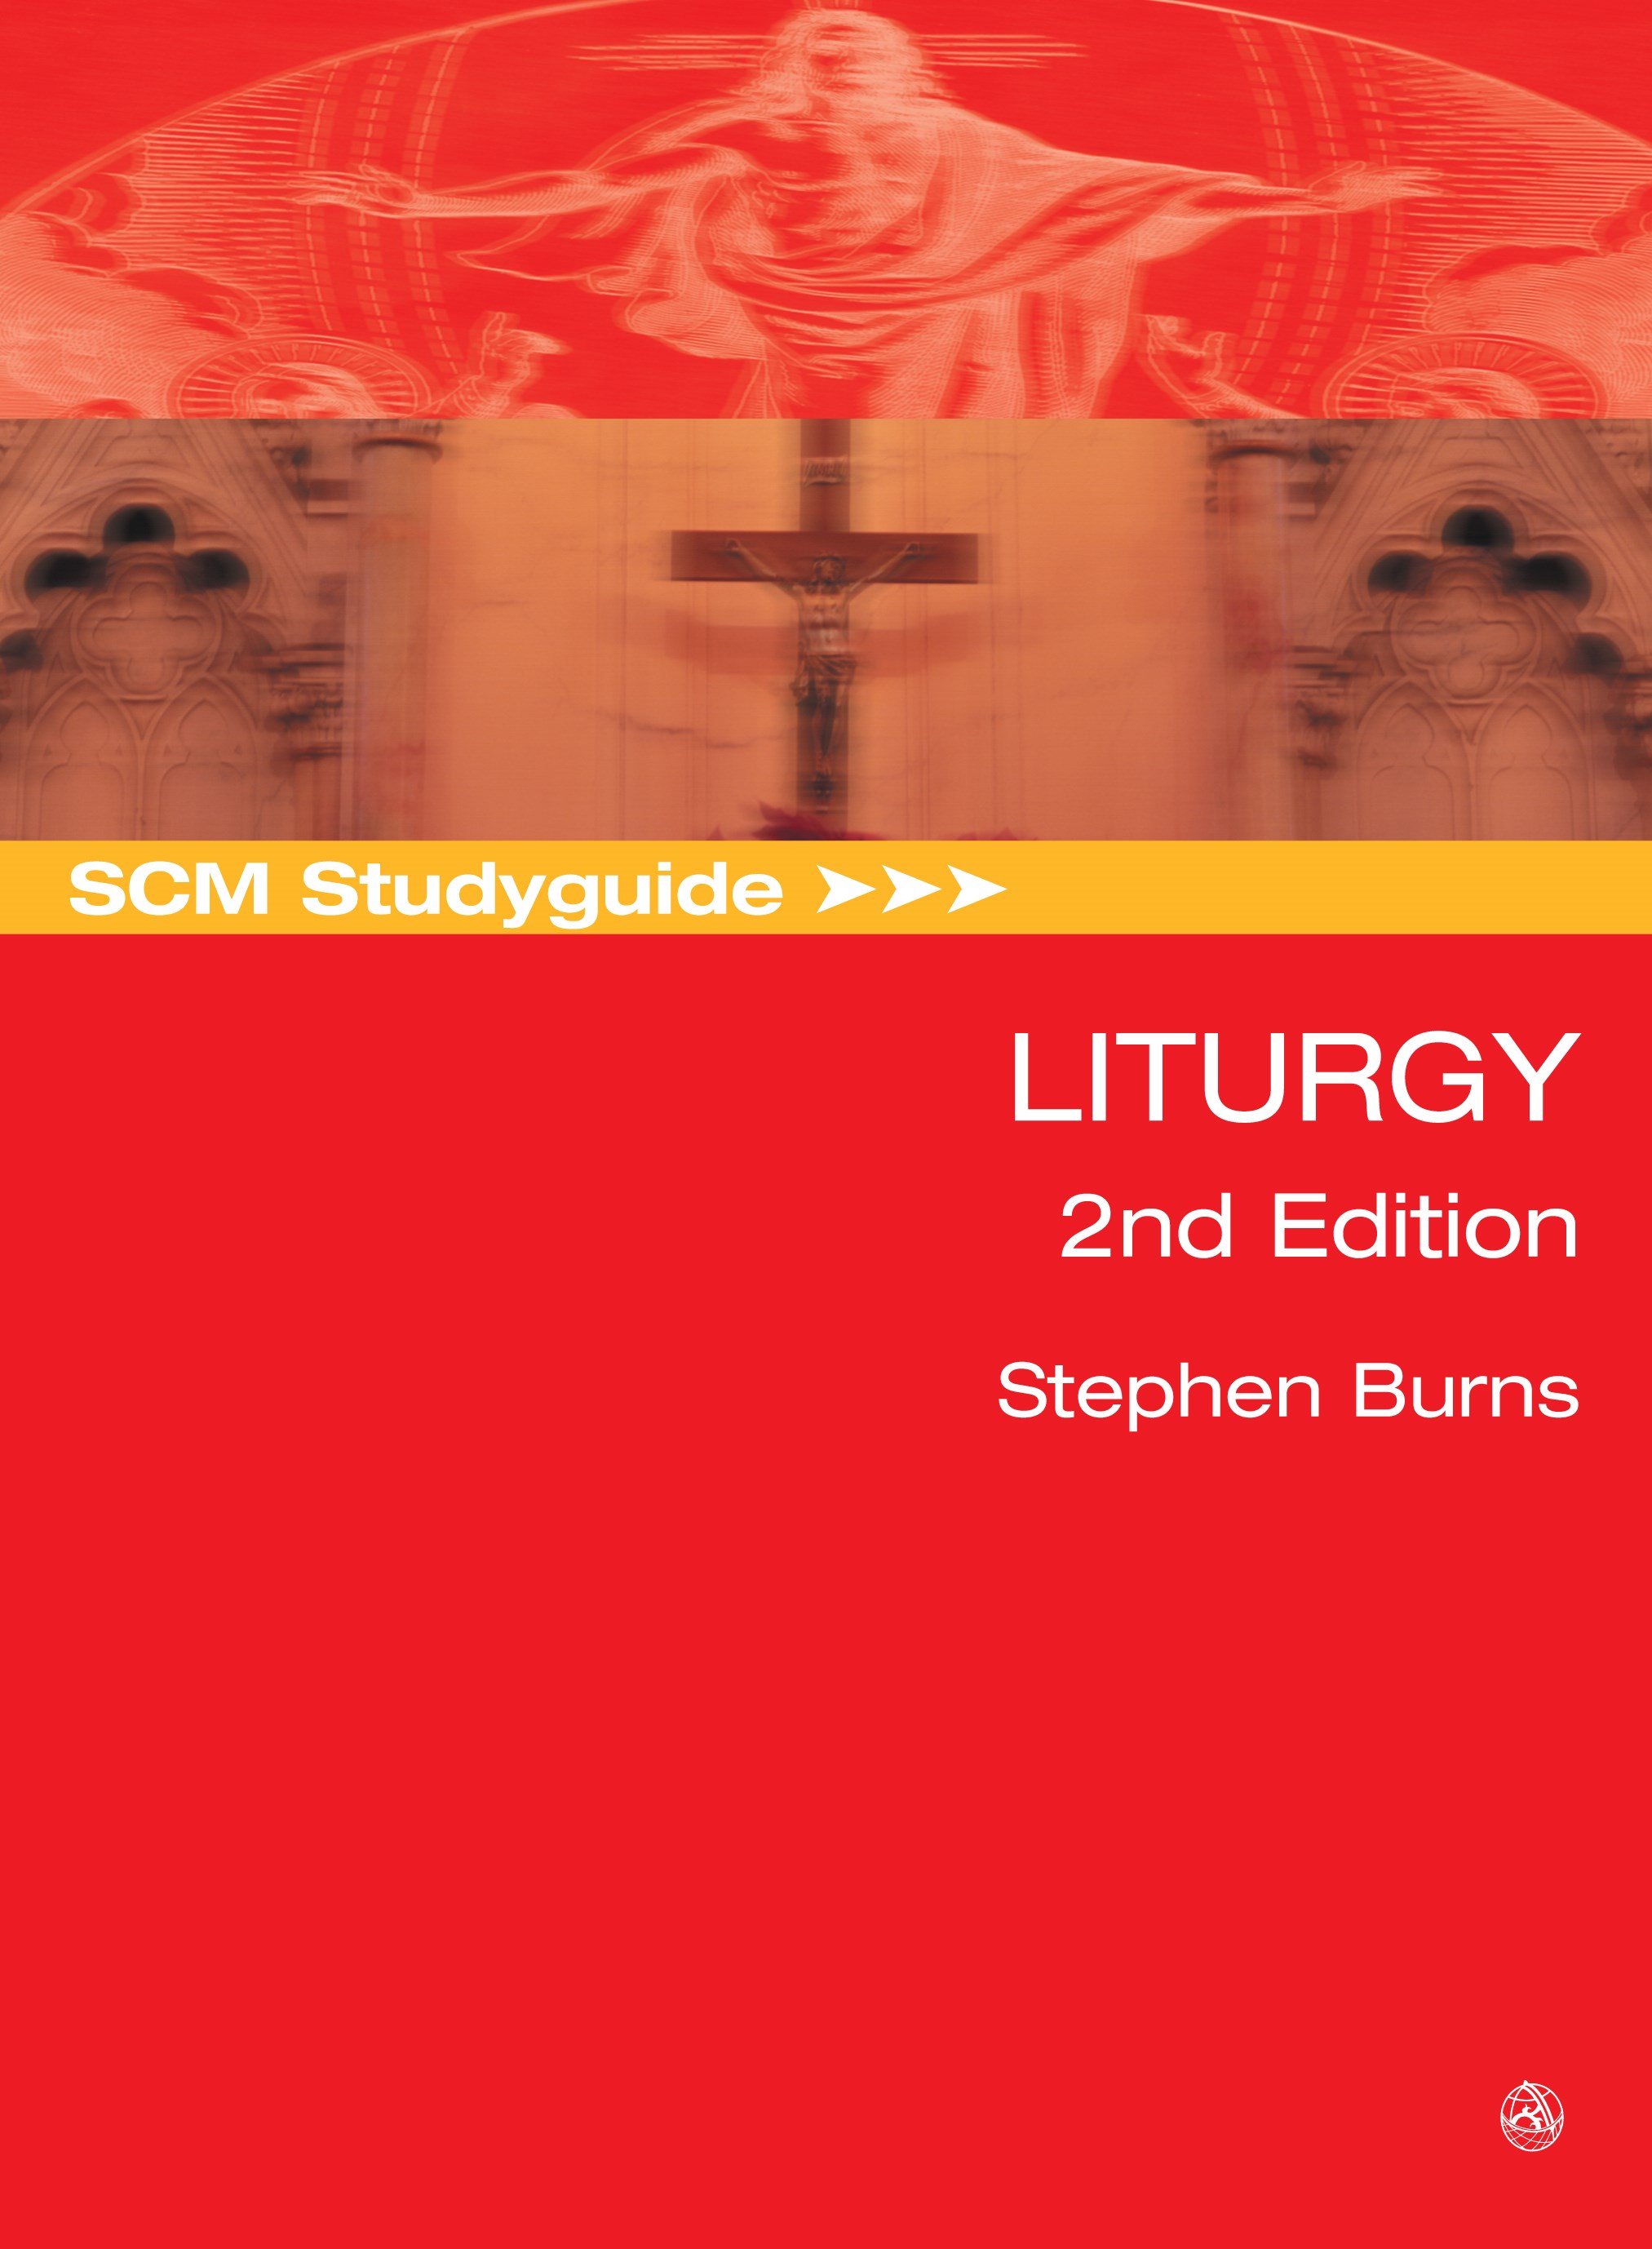 SCM Study Guide to the Liturgy 2nd edition